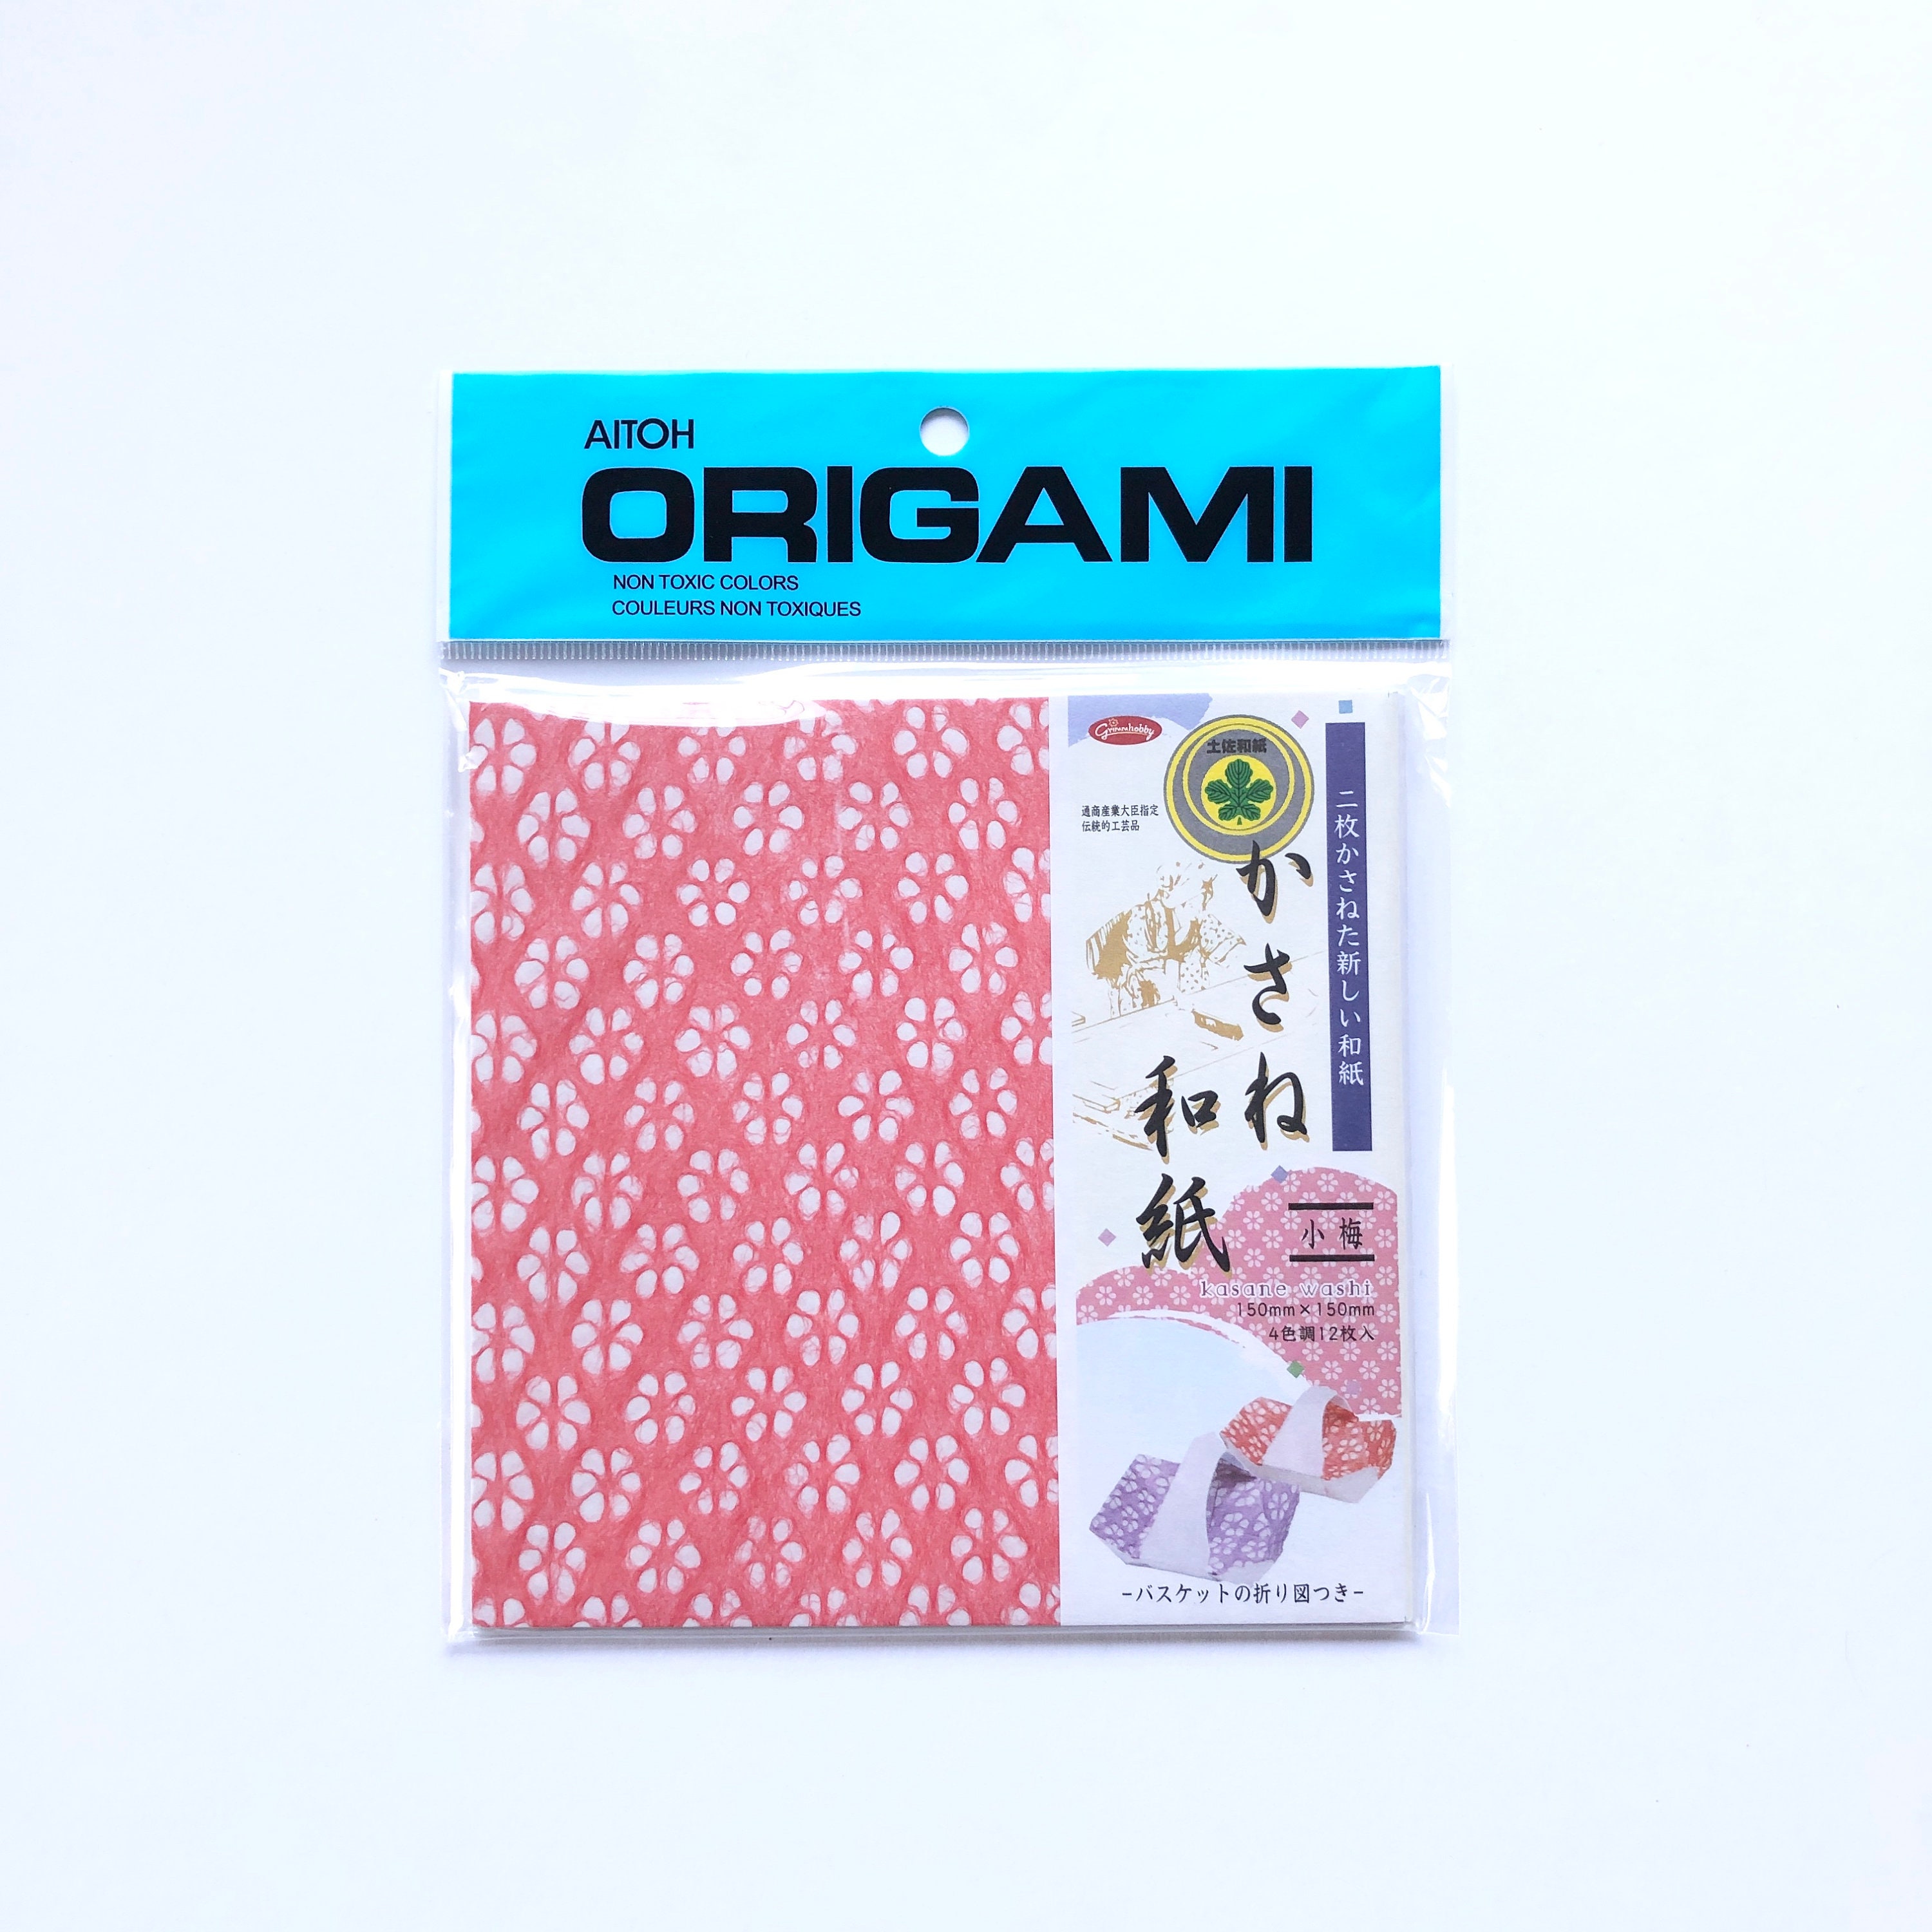 Origami Paper 6x6 Grimmhobby Made Japan 47 Sheets Multicolor